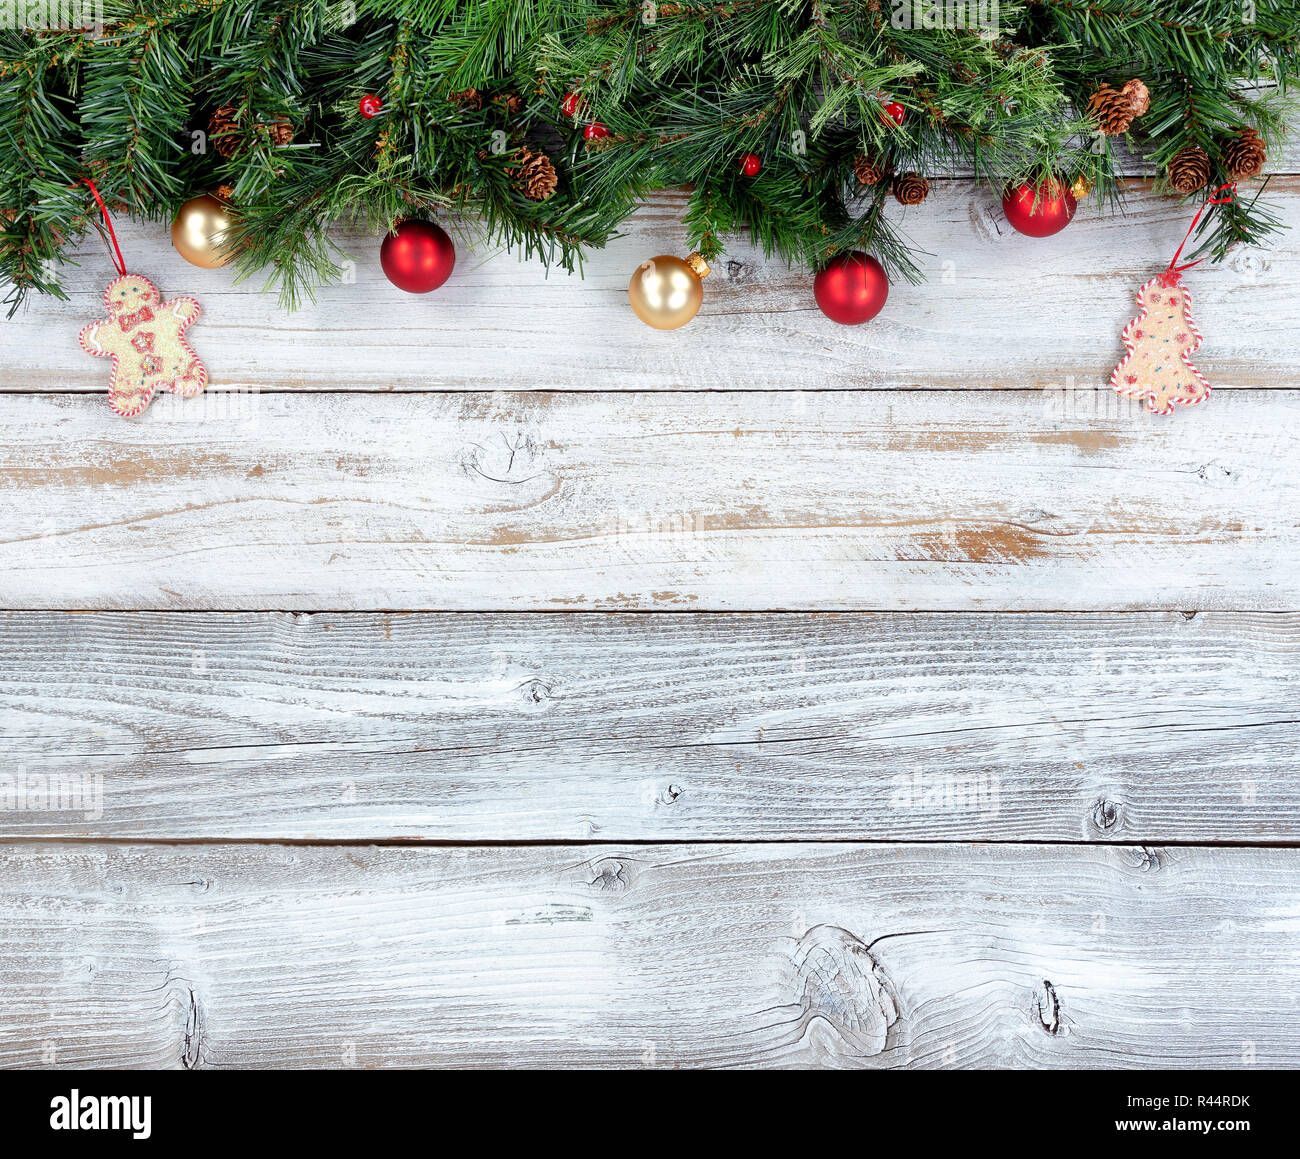 A Holiday Border From Evergreen Branches Stock Photo, Picture and Royalty  Free Image. Image 16442432.